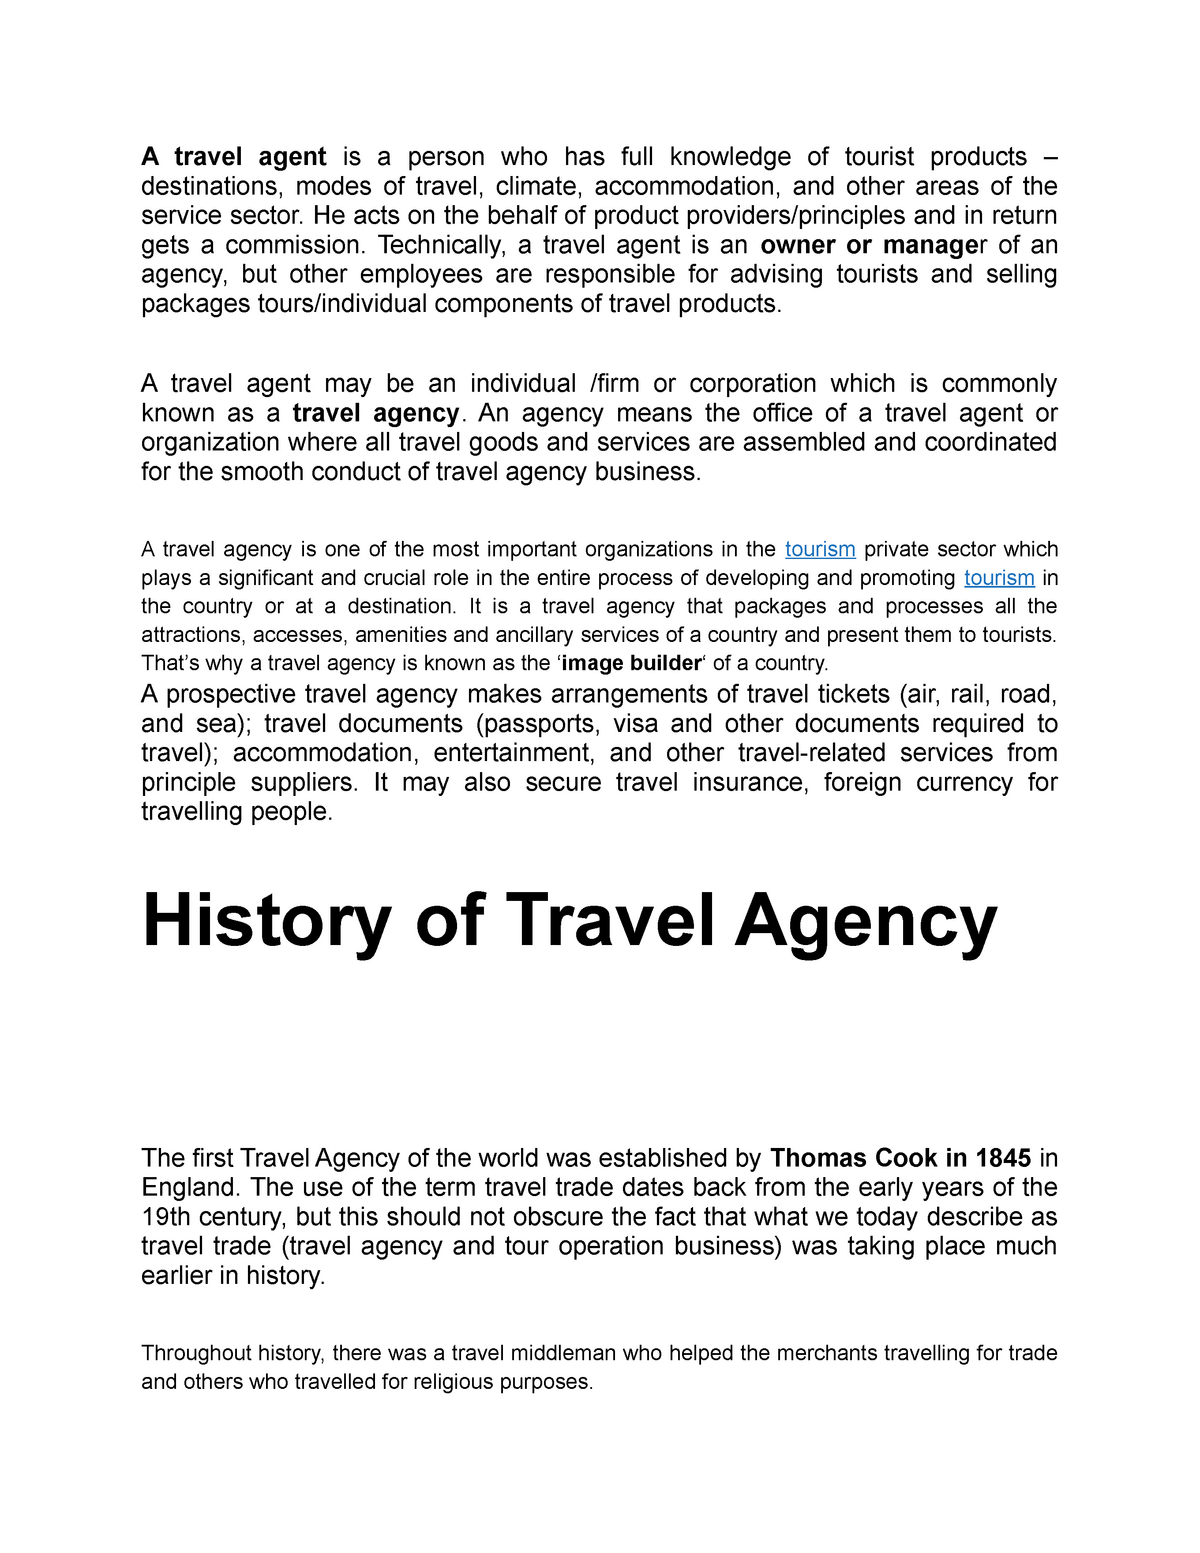 challenges of online travel agents case study answers